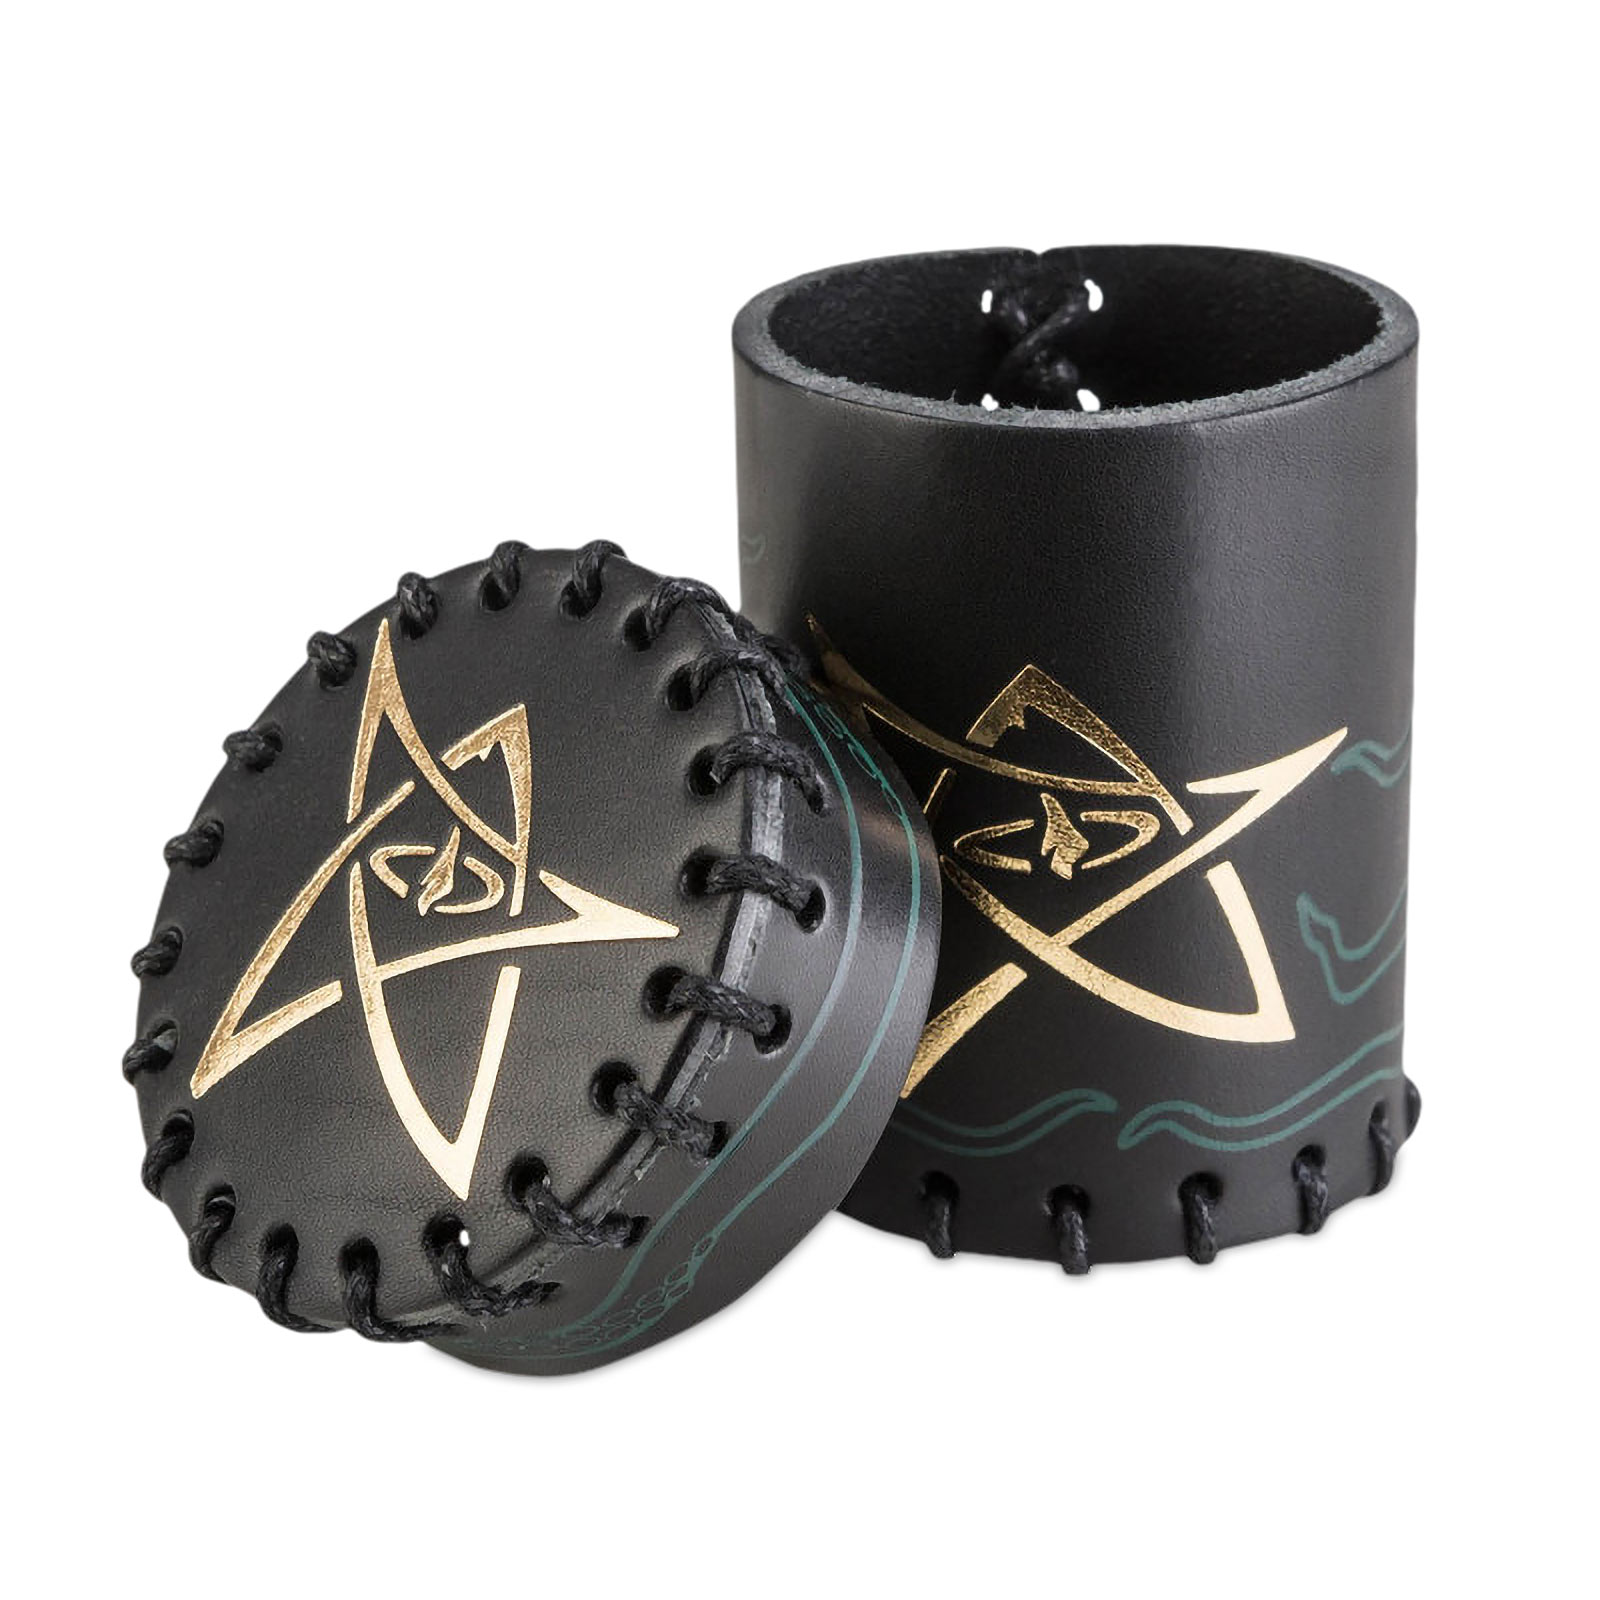 Call of Cthulhu RPG Elder Sign Dice Cup black